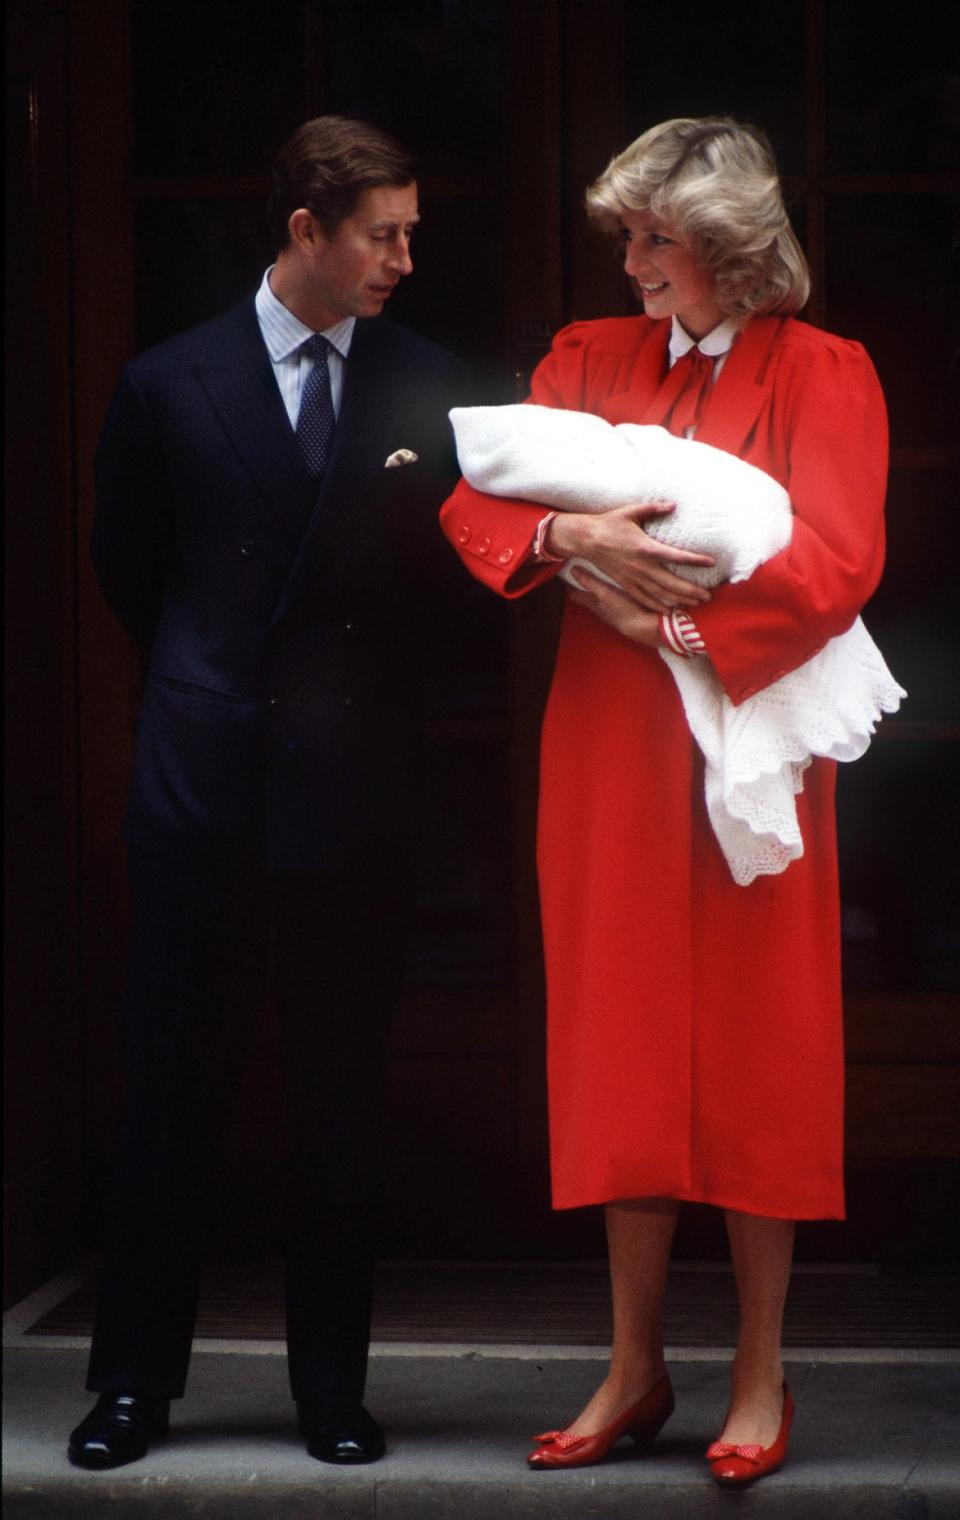 <div class="inline-image__title">Sept. 16, 1984</div> <div class="inline-image__credit">Terry Fincher/Princess Diana Archive/Getty</div>